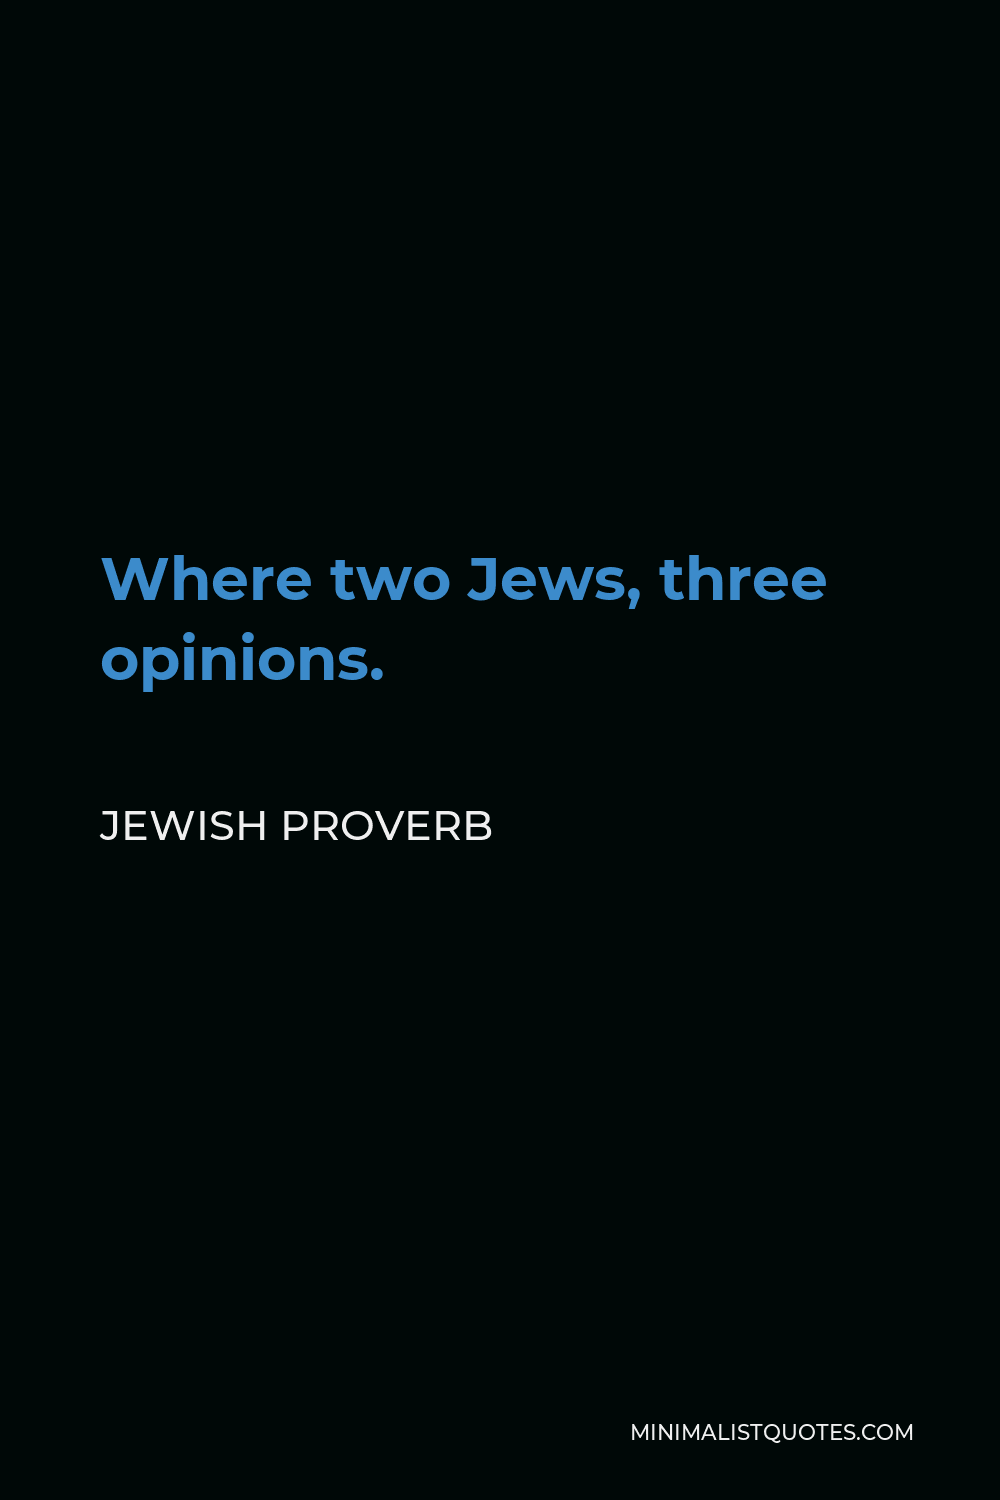 Jewish Proverb Quote - Where two Jews, three opinions.